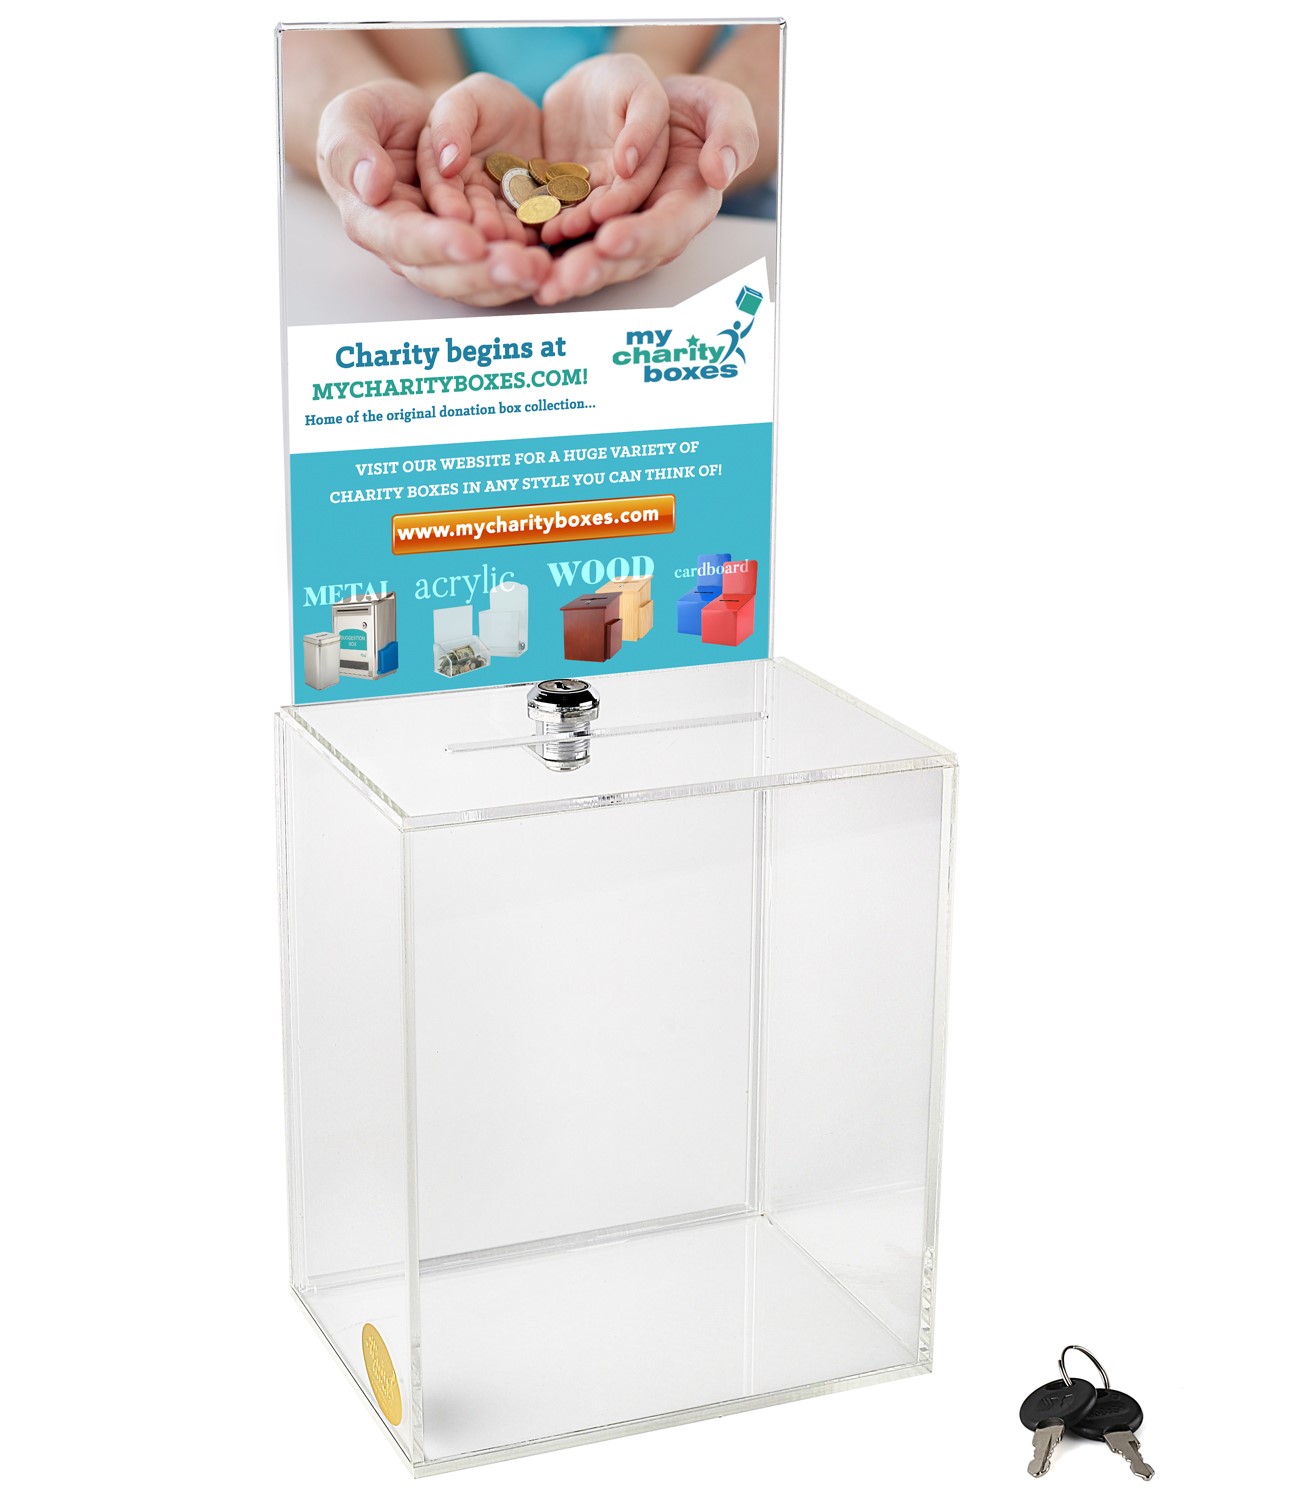 Mini Charity Collection Box w-5x4 Sign back